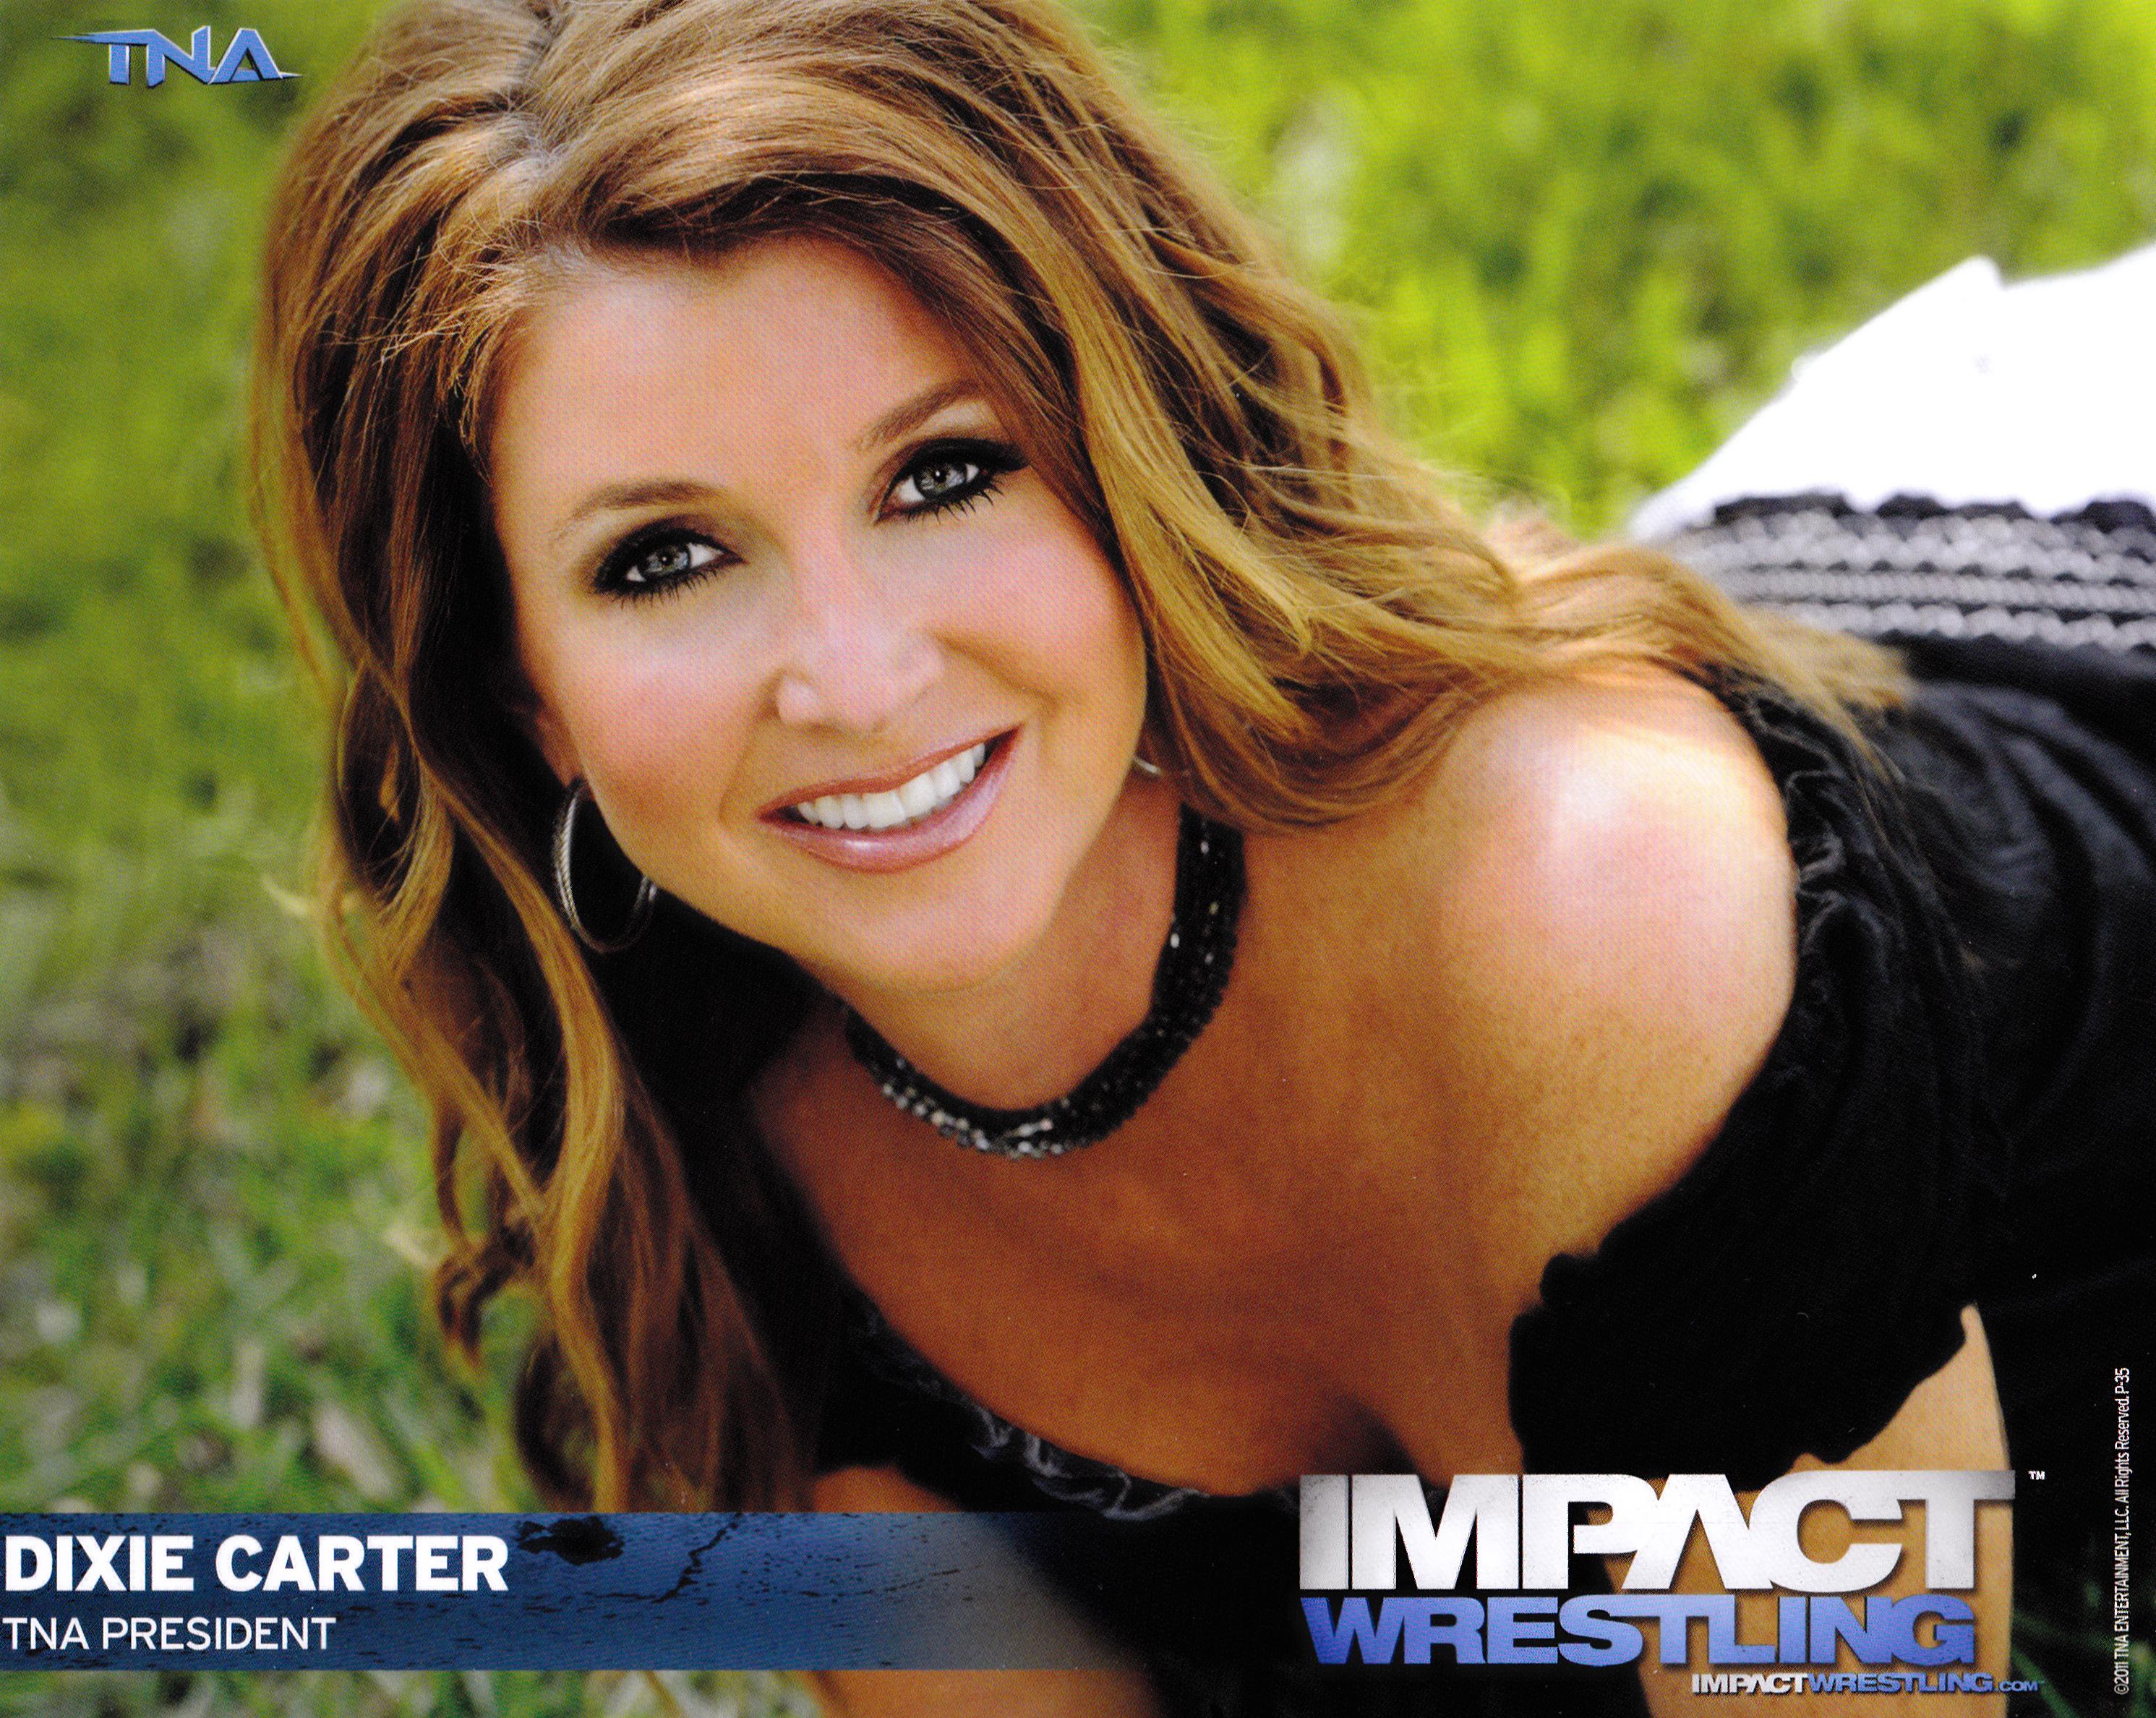 Dixie Carter talks about TNA’s top storylines.